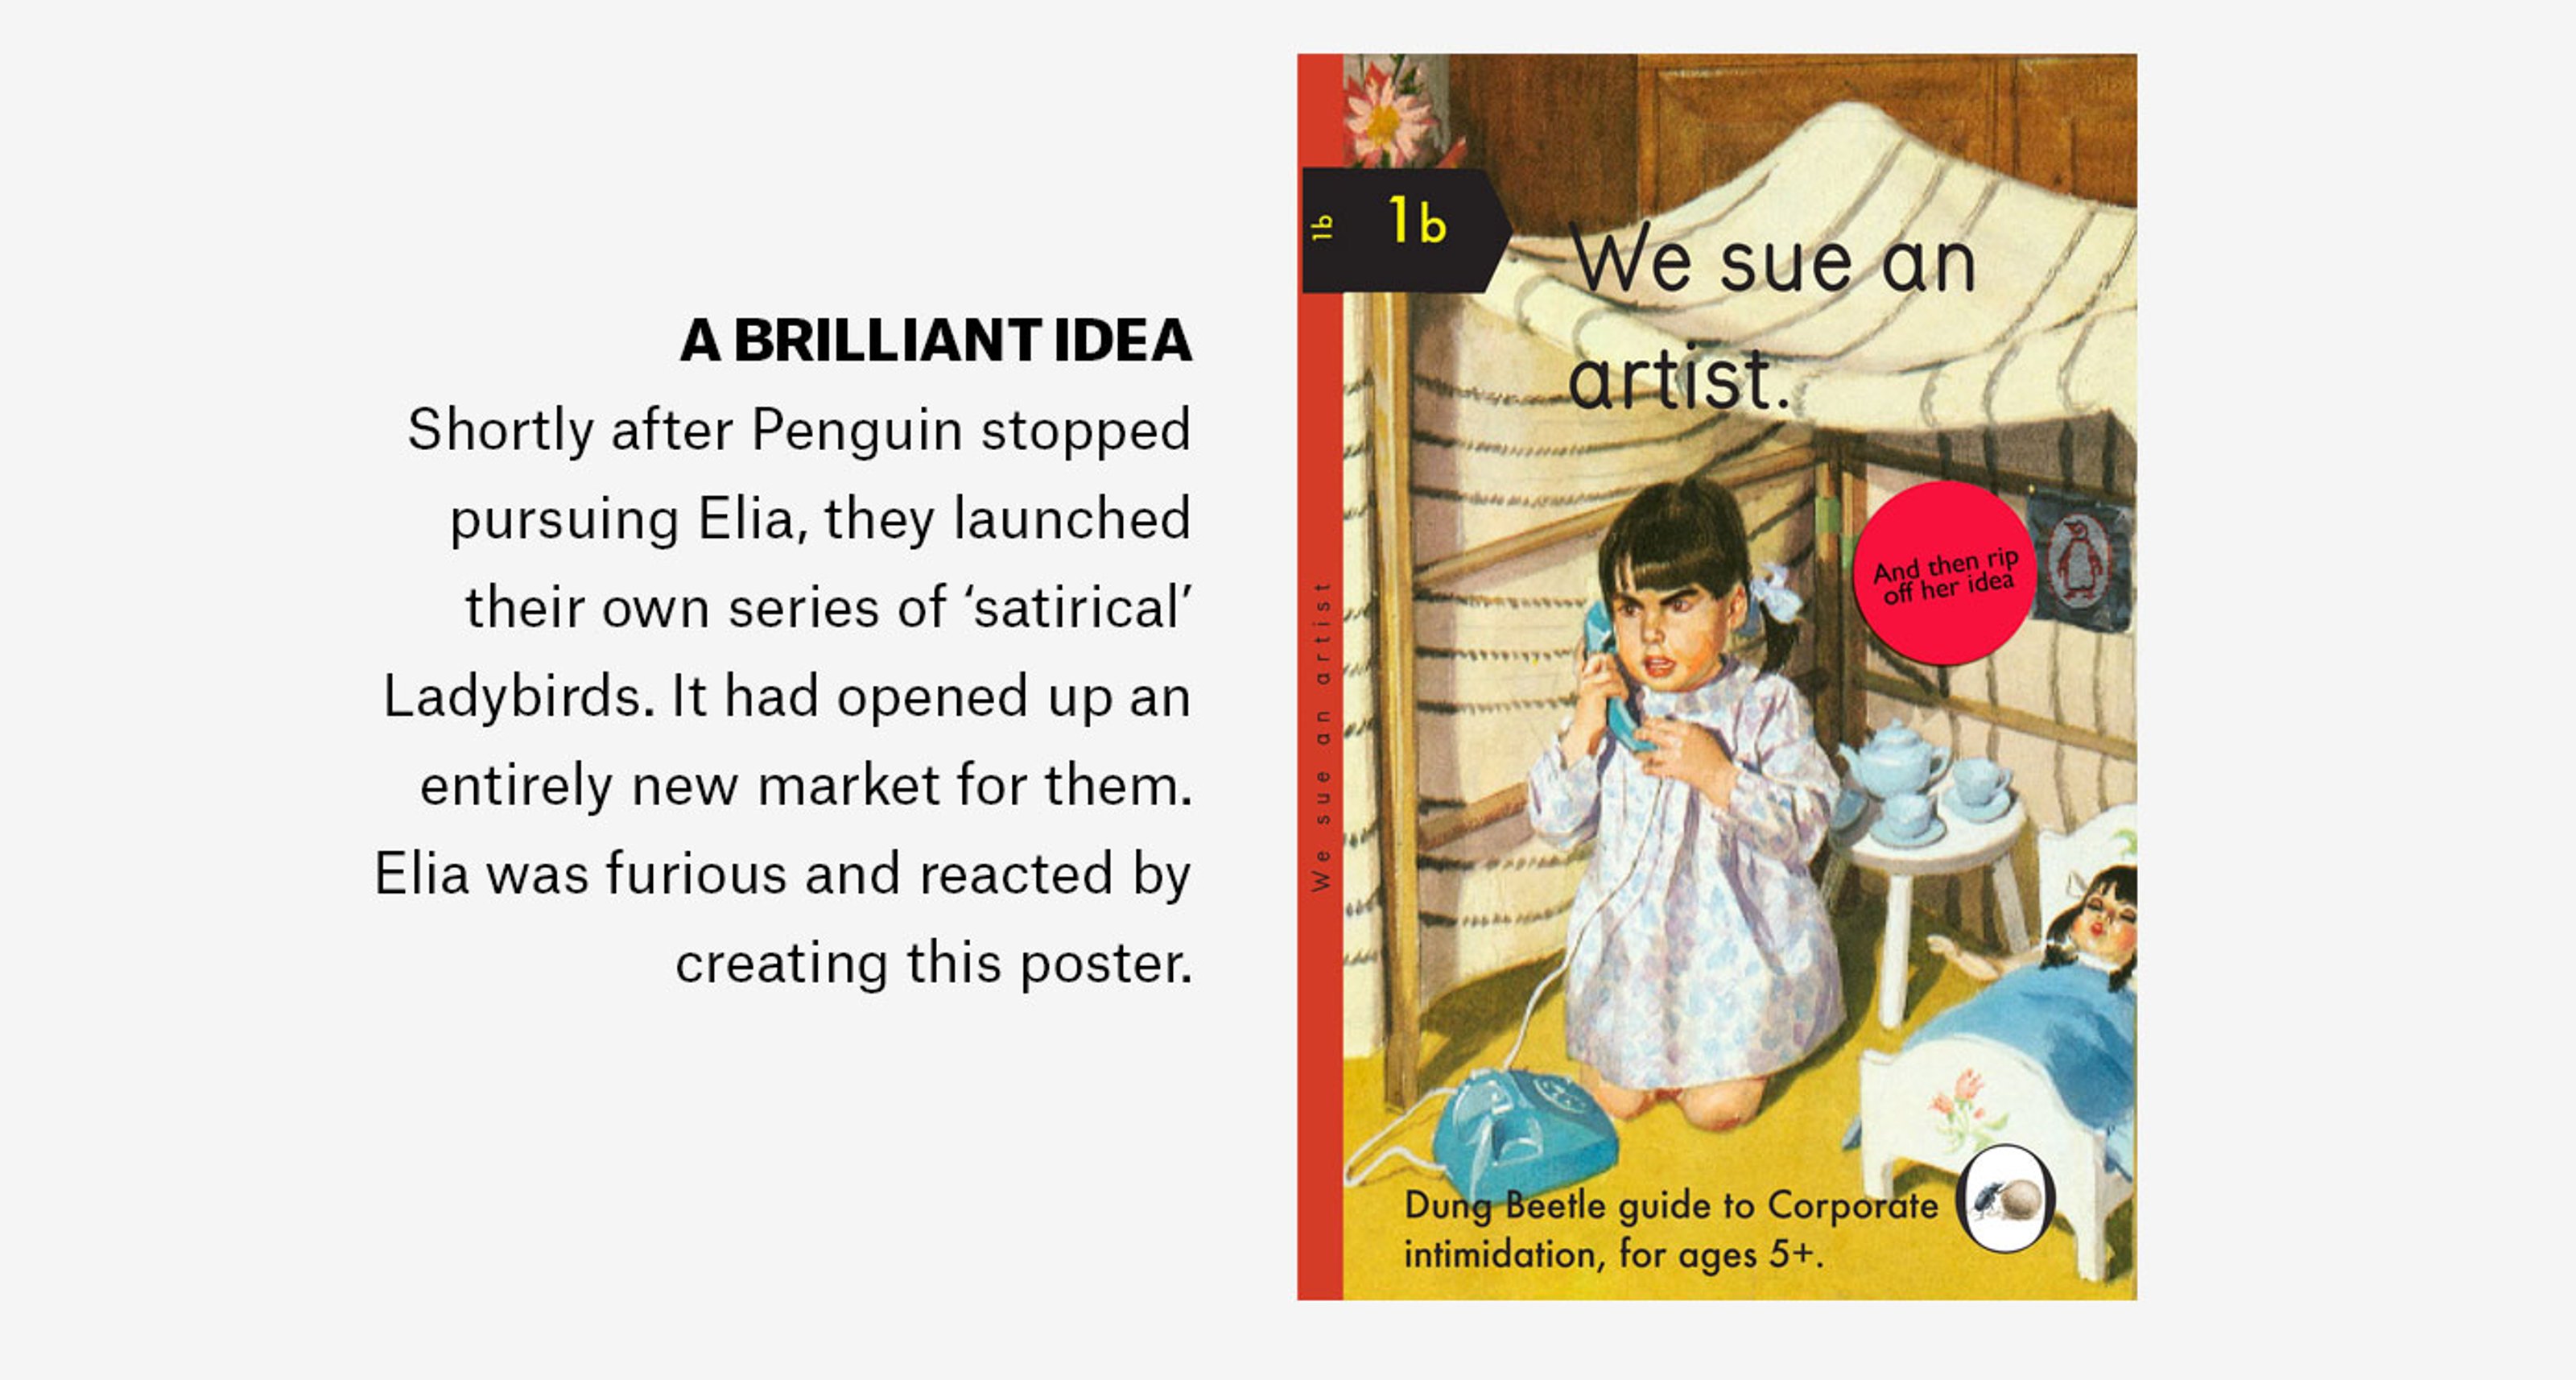 We Sue an Artist poster created by Miriam Elia in response to Penguin suing her and ripping off her idea